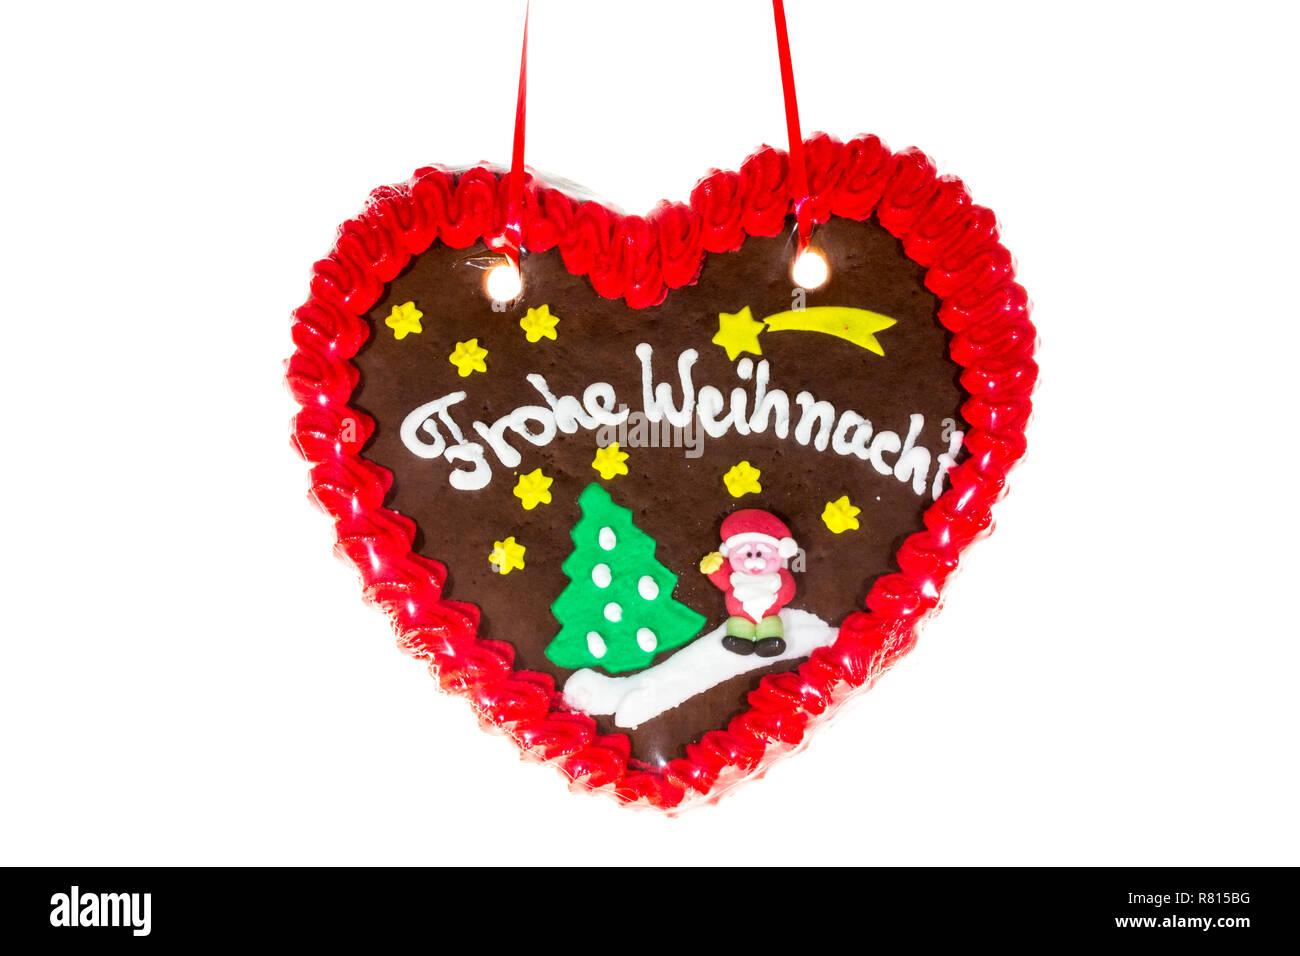 Gingerbread heart with the writing 'Frohe Weihnachten', German for 'Merry Christmas' Stock Photo